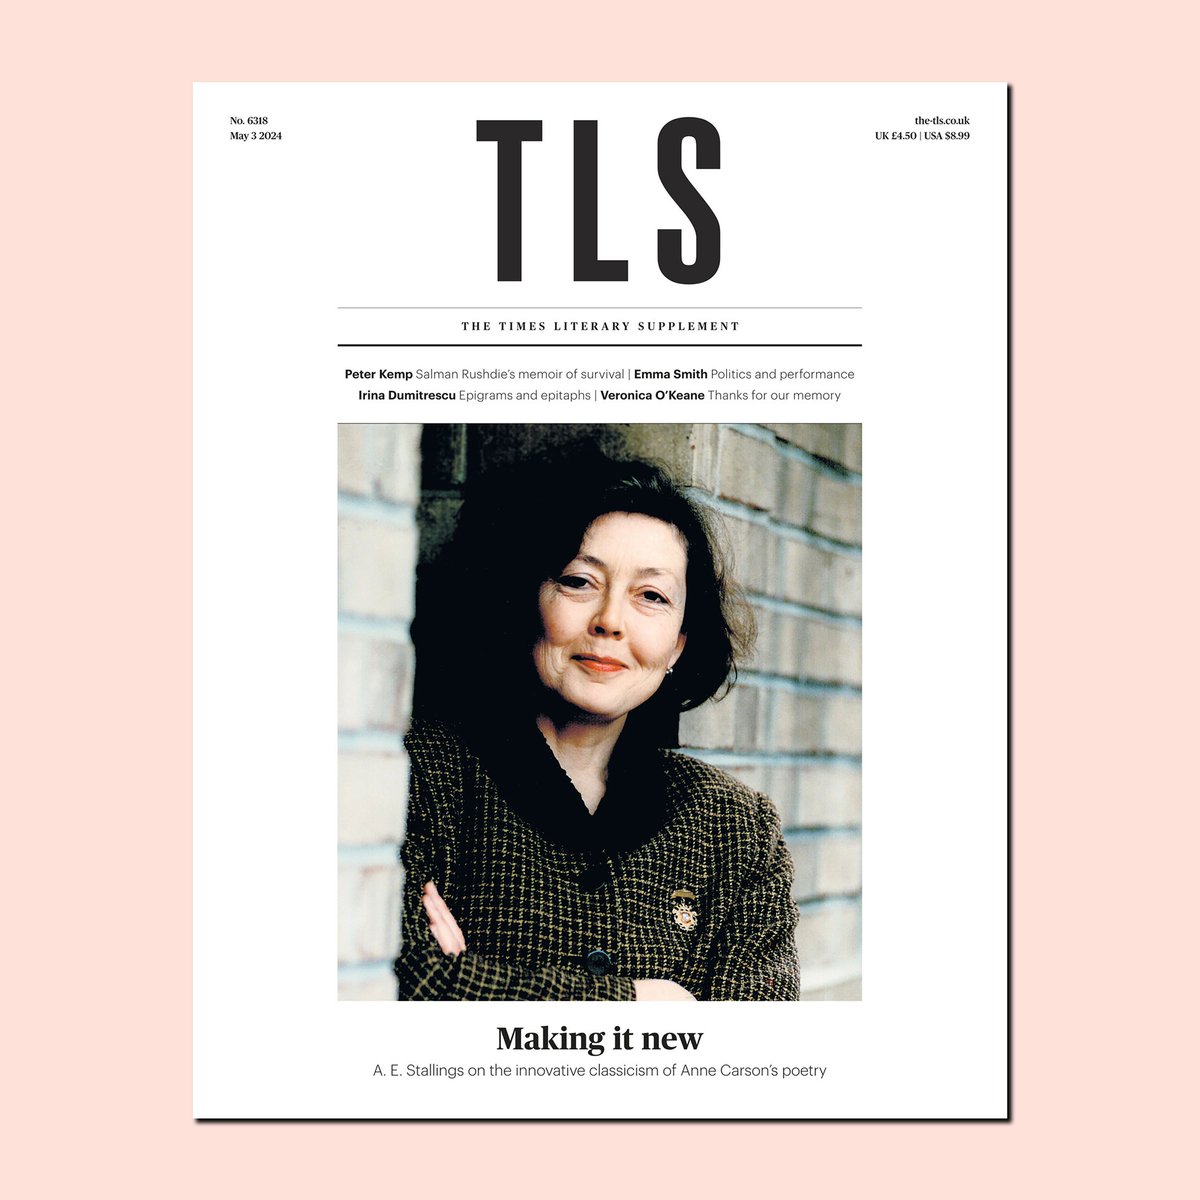 This week’s @TheTLS, featuring @ae_stallings on Anne Carson; @LawDavF on Nato; @OldFortunatus on Richard Sennett; Peter Kemp on Salman Rushdie; @digkabri on Linear B; poems by Carson, @MissLizBerry and Yehuda Amichai (tr. Robert Alter) – and more